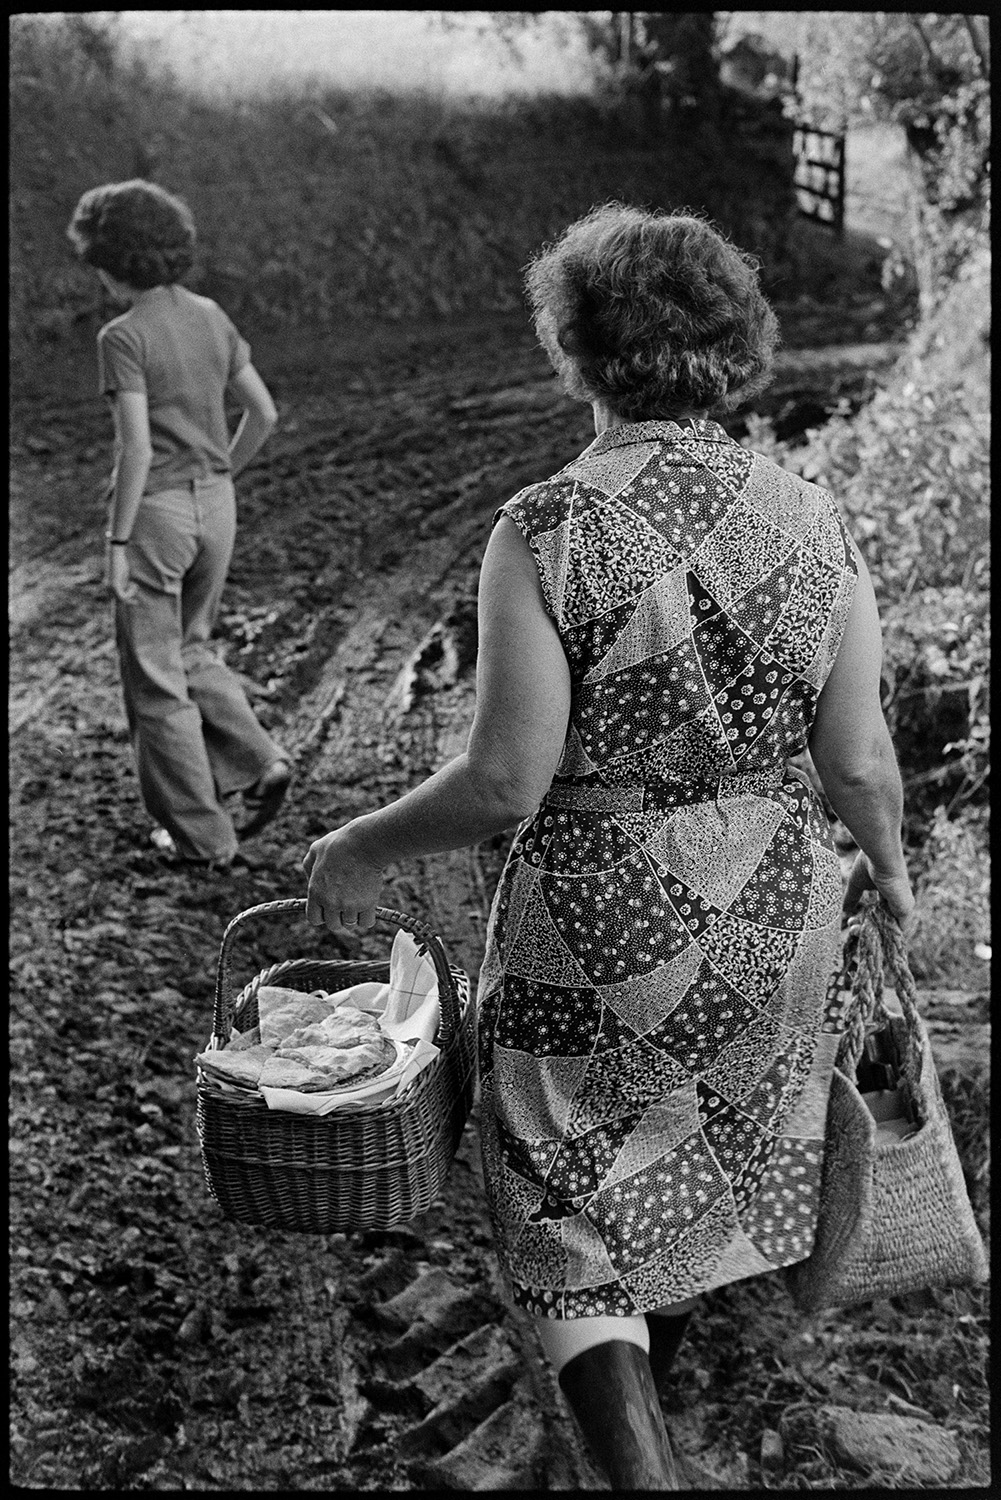 Woman taking tea to farmers in field. 
[Hettie Ward and Elizabeth Ward walking along a muddy track at Parsonage, Iddesleigh, taking a basket of food to farmers working in the fields.]